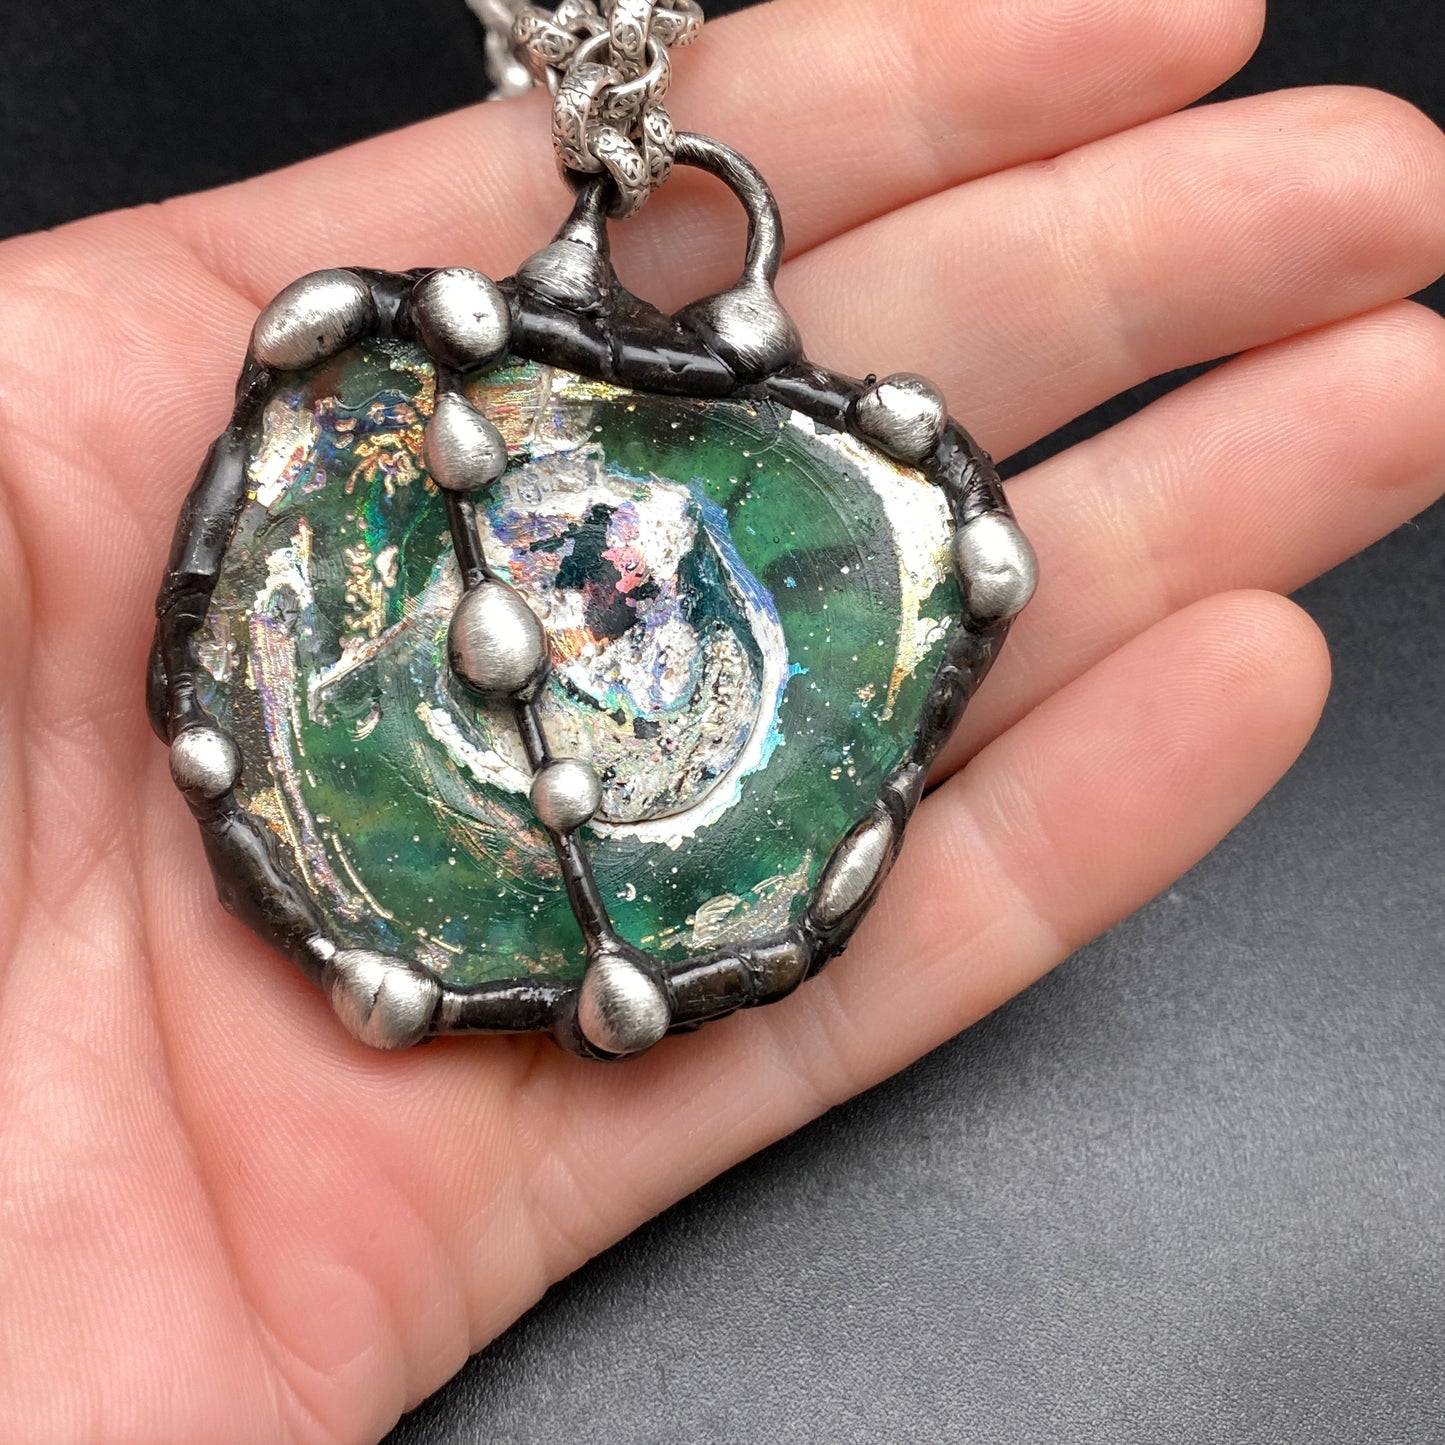 Looking Glass ~ Ancient Roman Glass Necklace